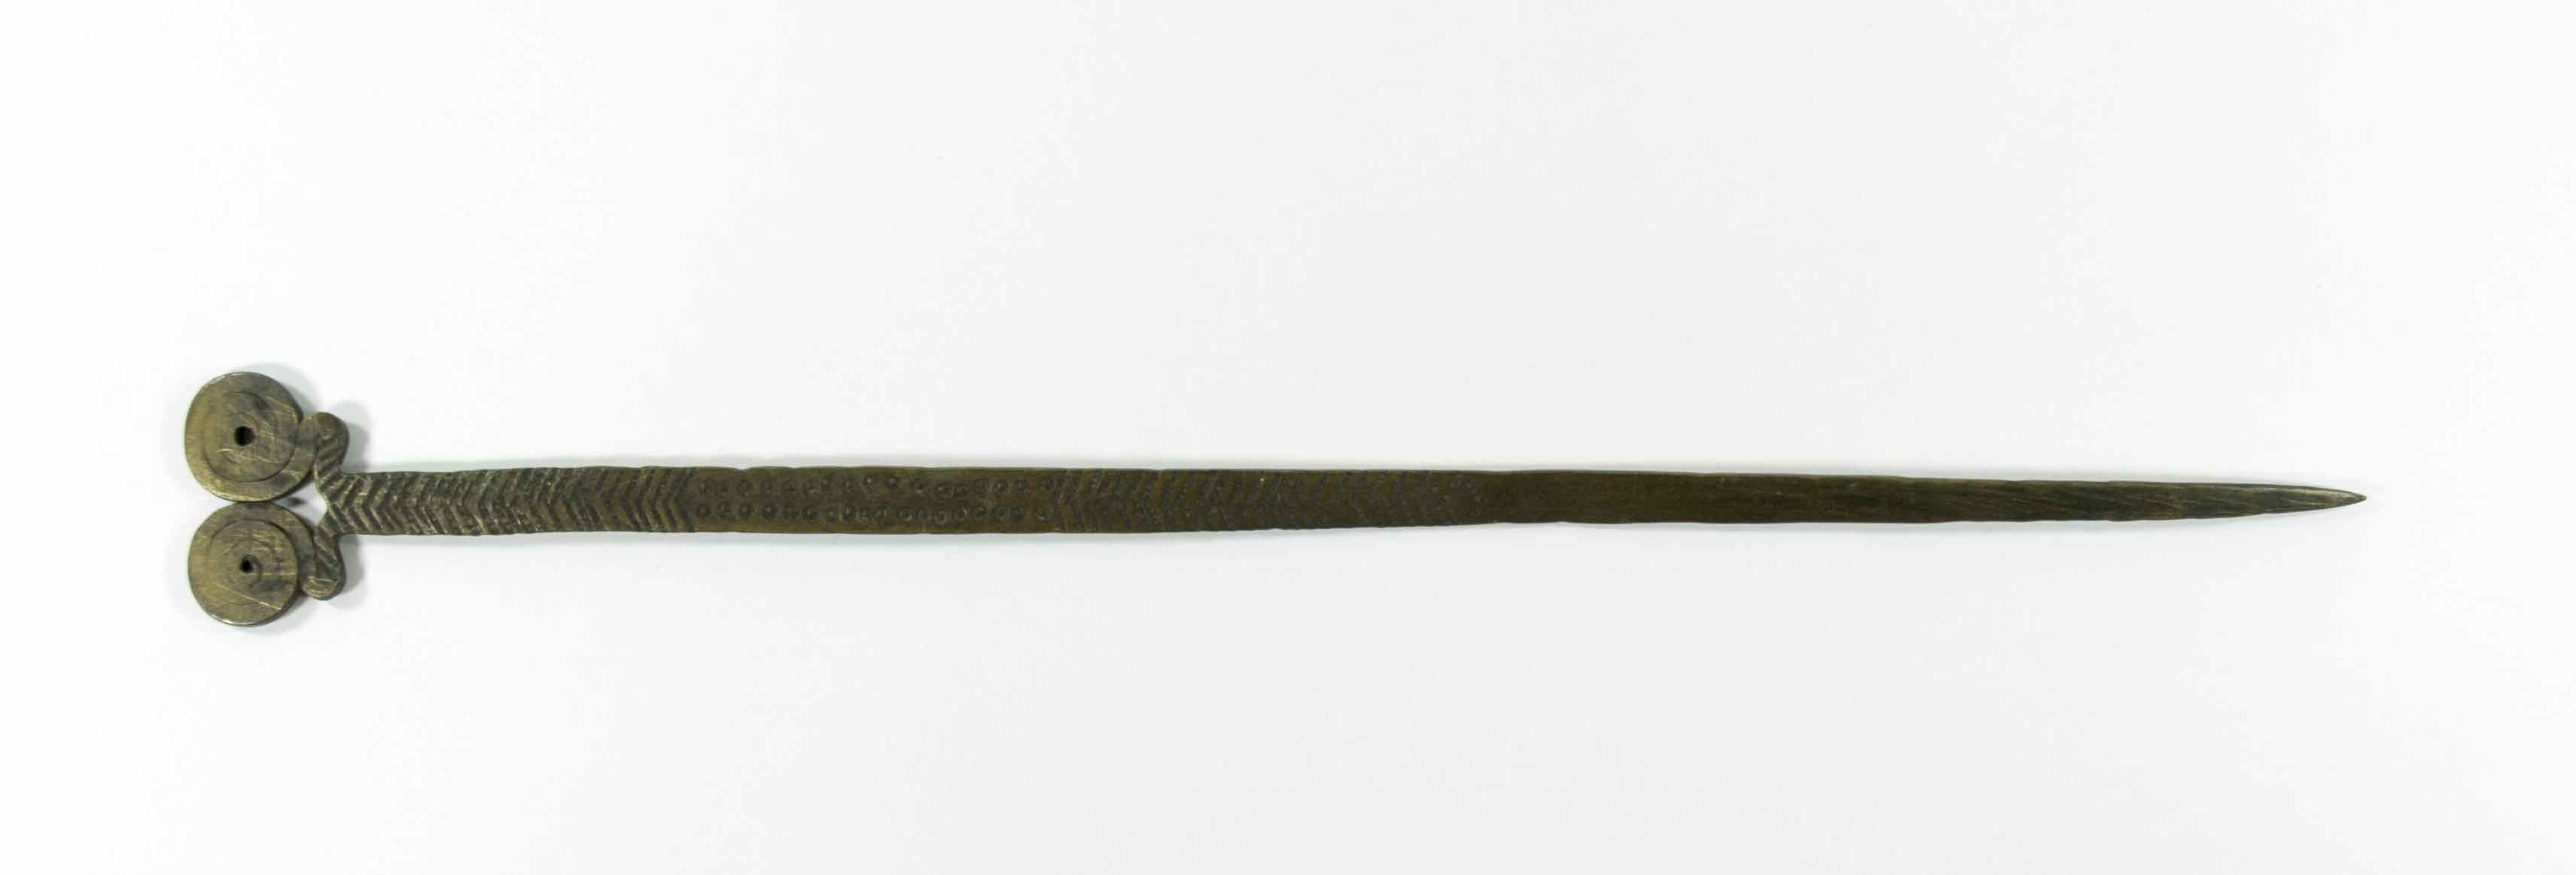 Brass hairpin with two spirals forming the head of the pin.